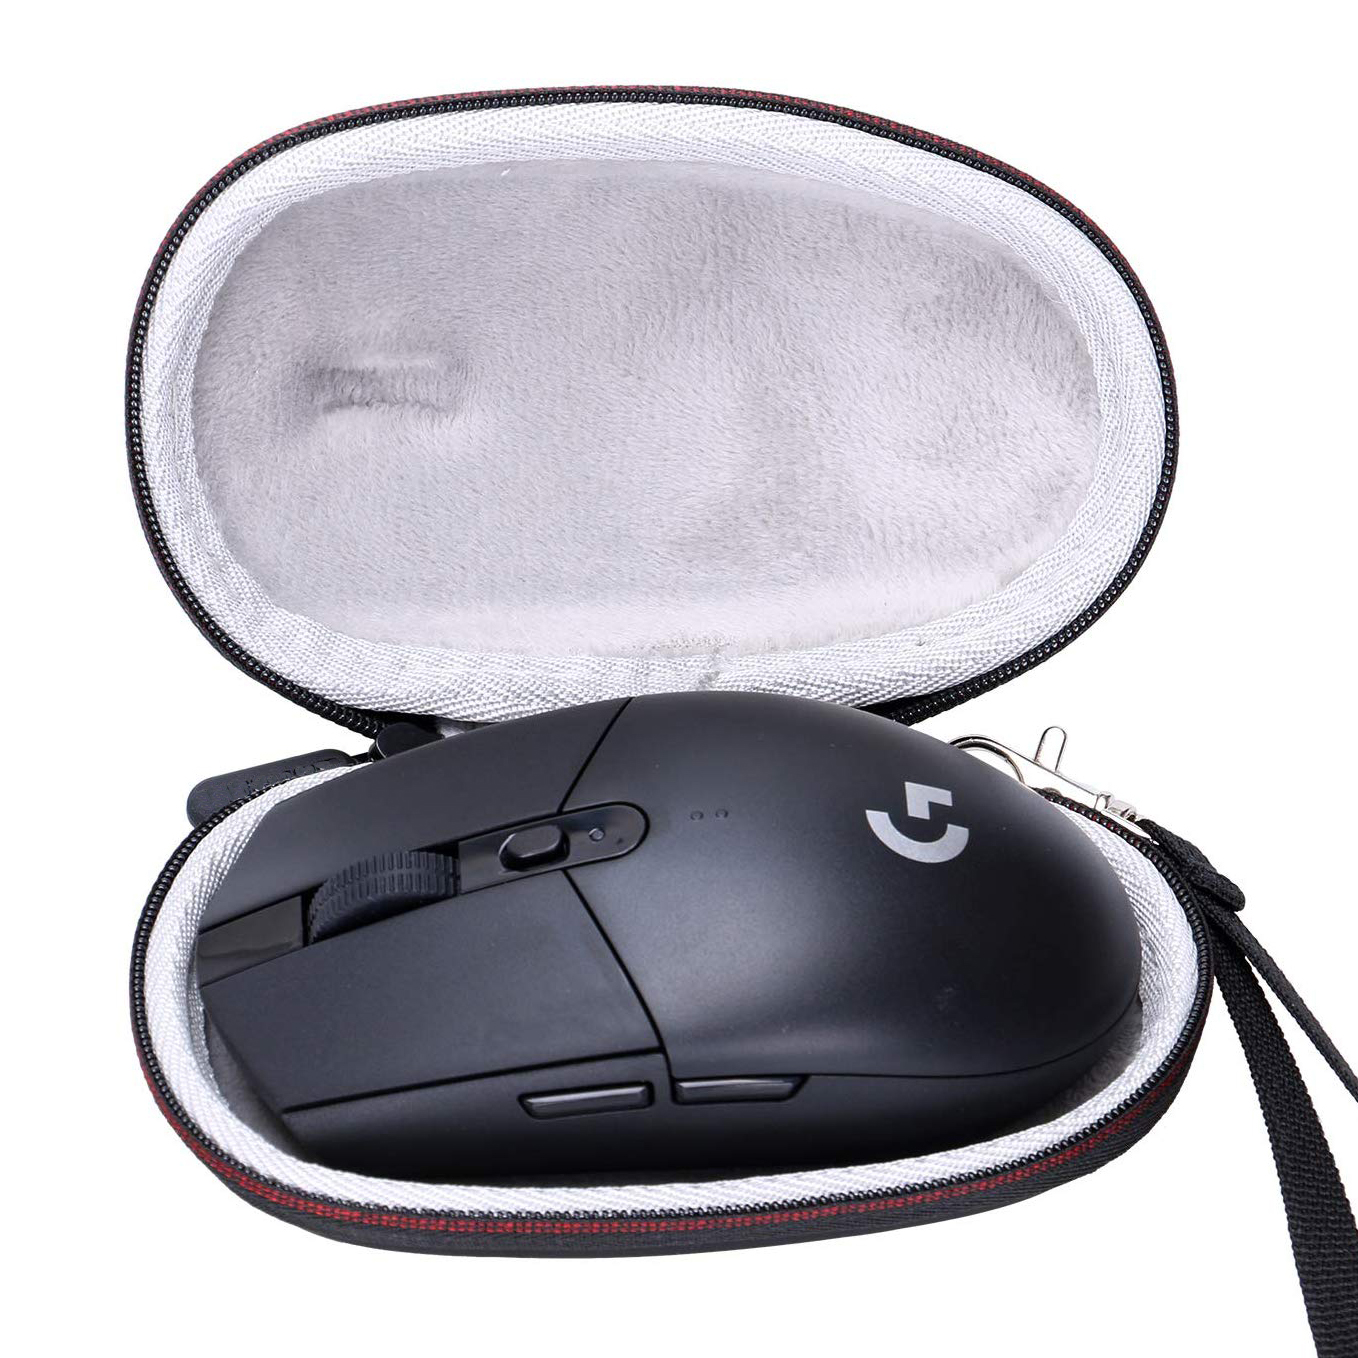 Wholesale Thermoformed Eva Hard Travel Mouse Case For Carrying Game Computer Mouse